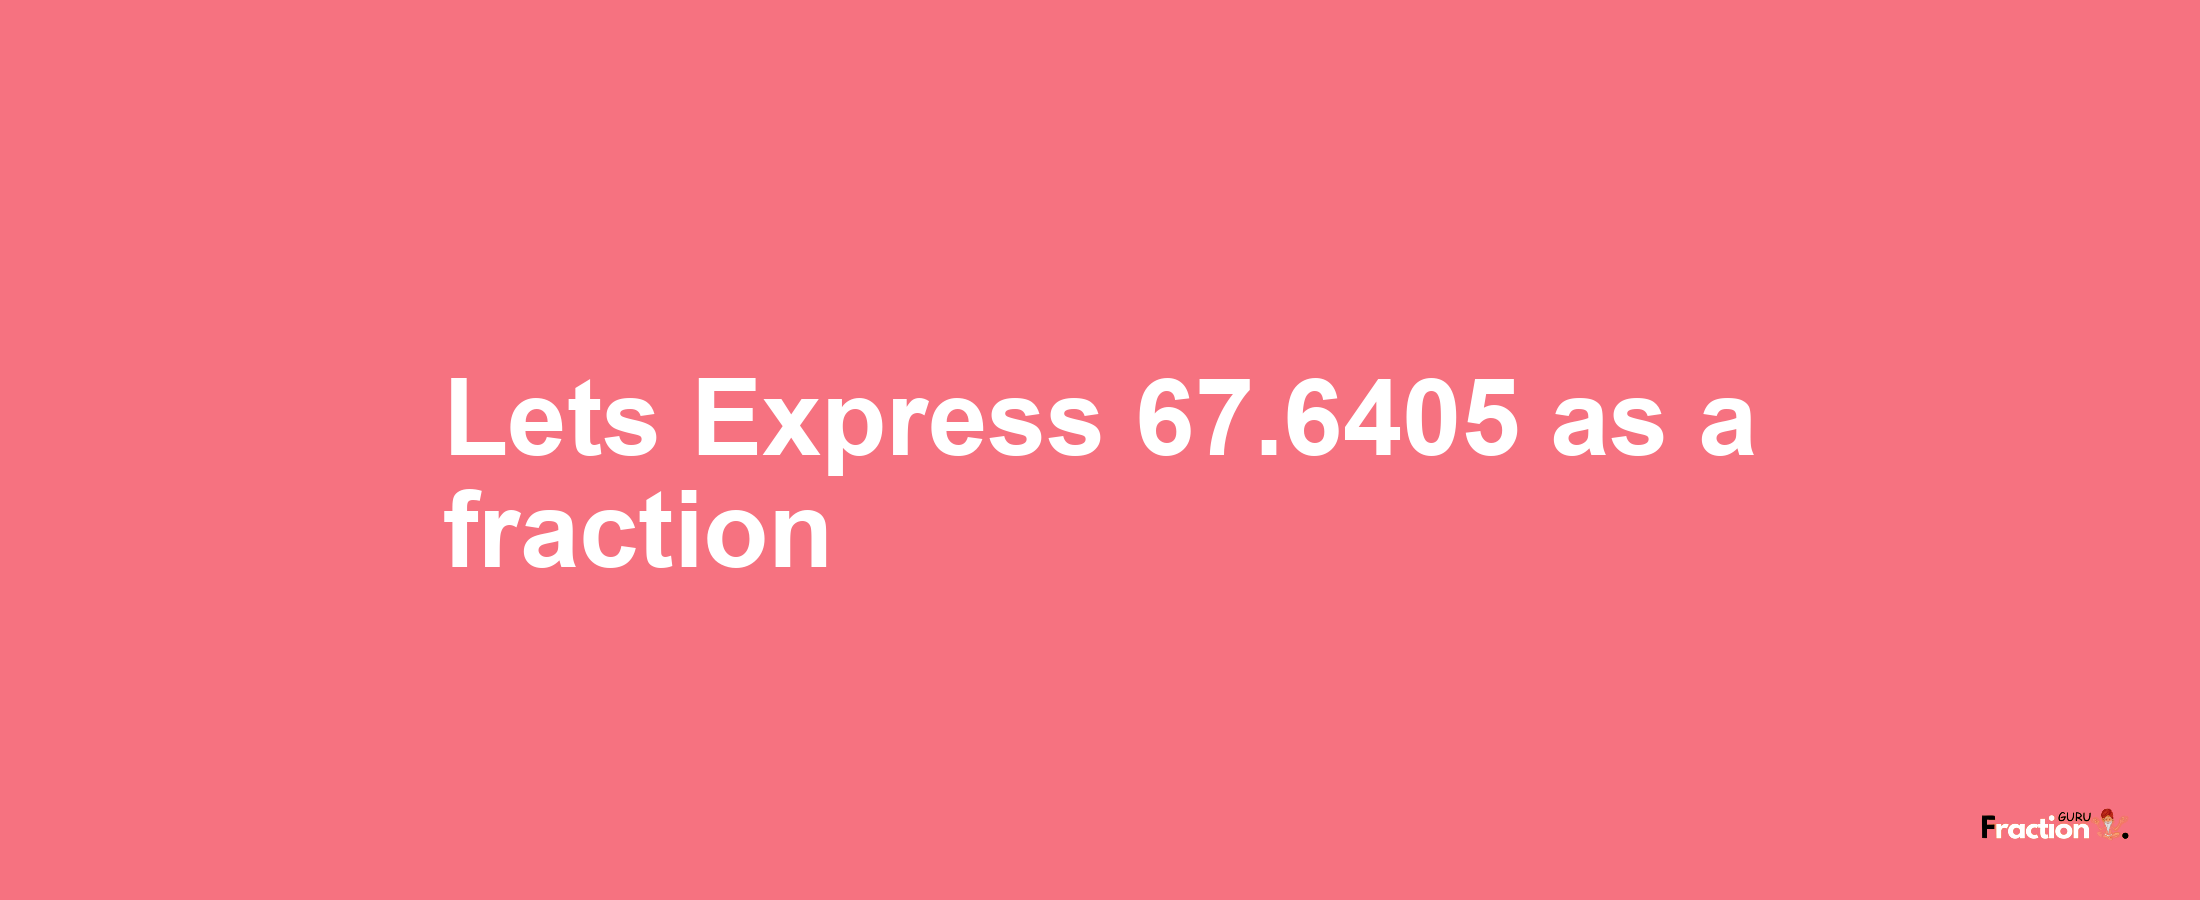 Lets Express 67.6405 as afraction